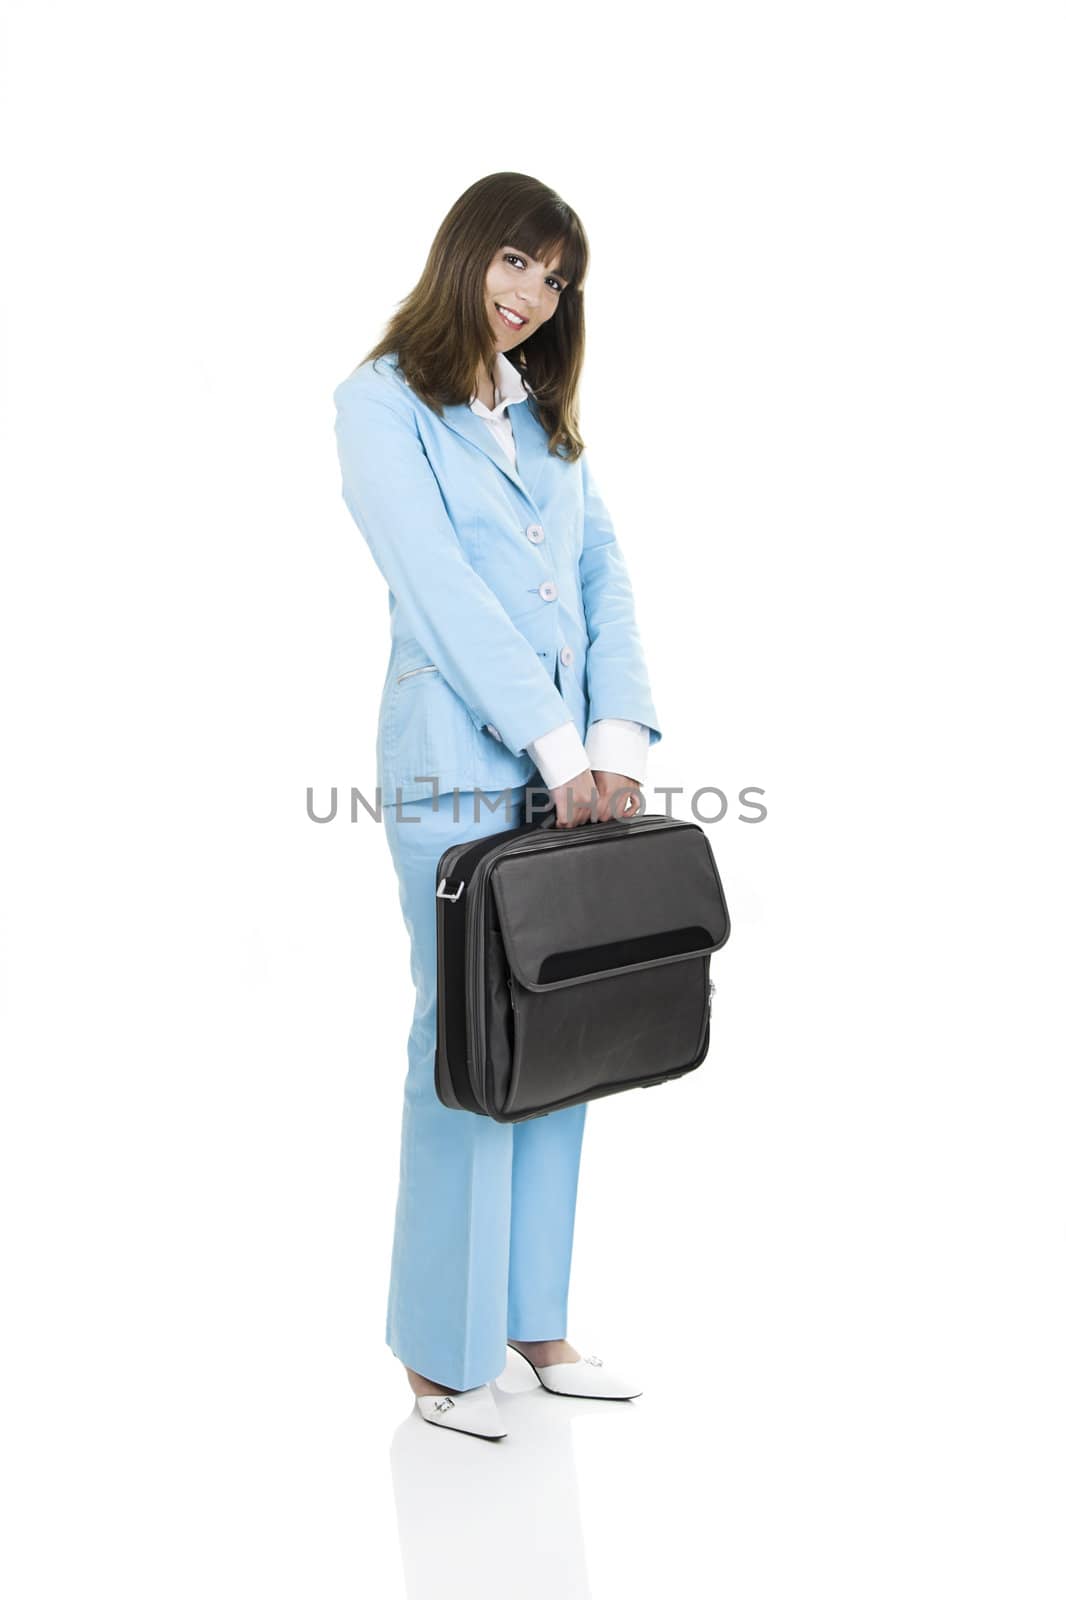 Business active woman standing over a white background with a briefcase in her arms